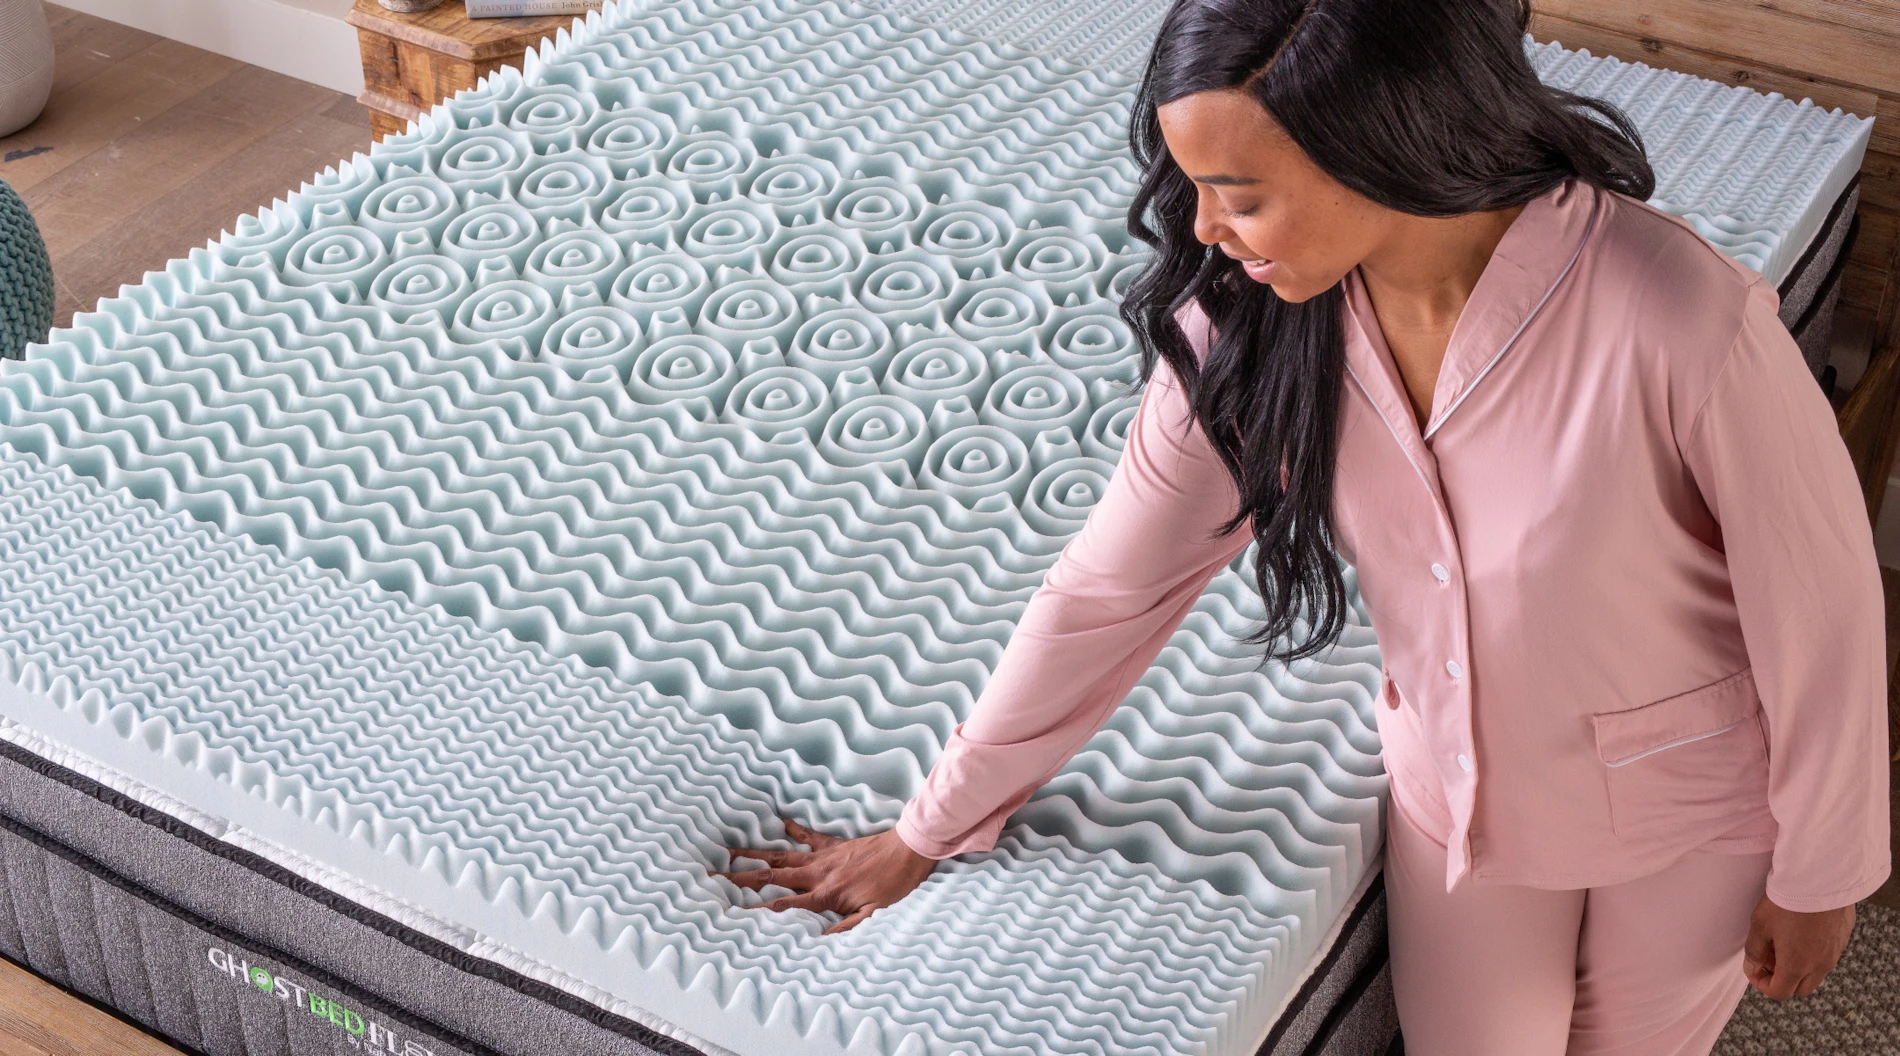 A young woman places a memory foam mattress topper on her bed.